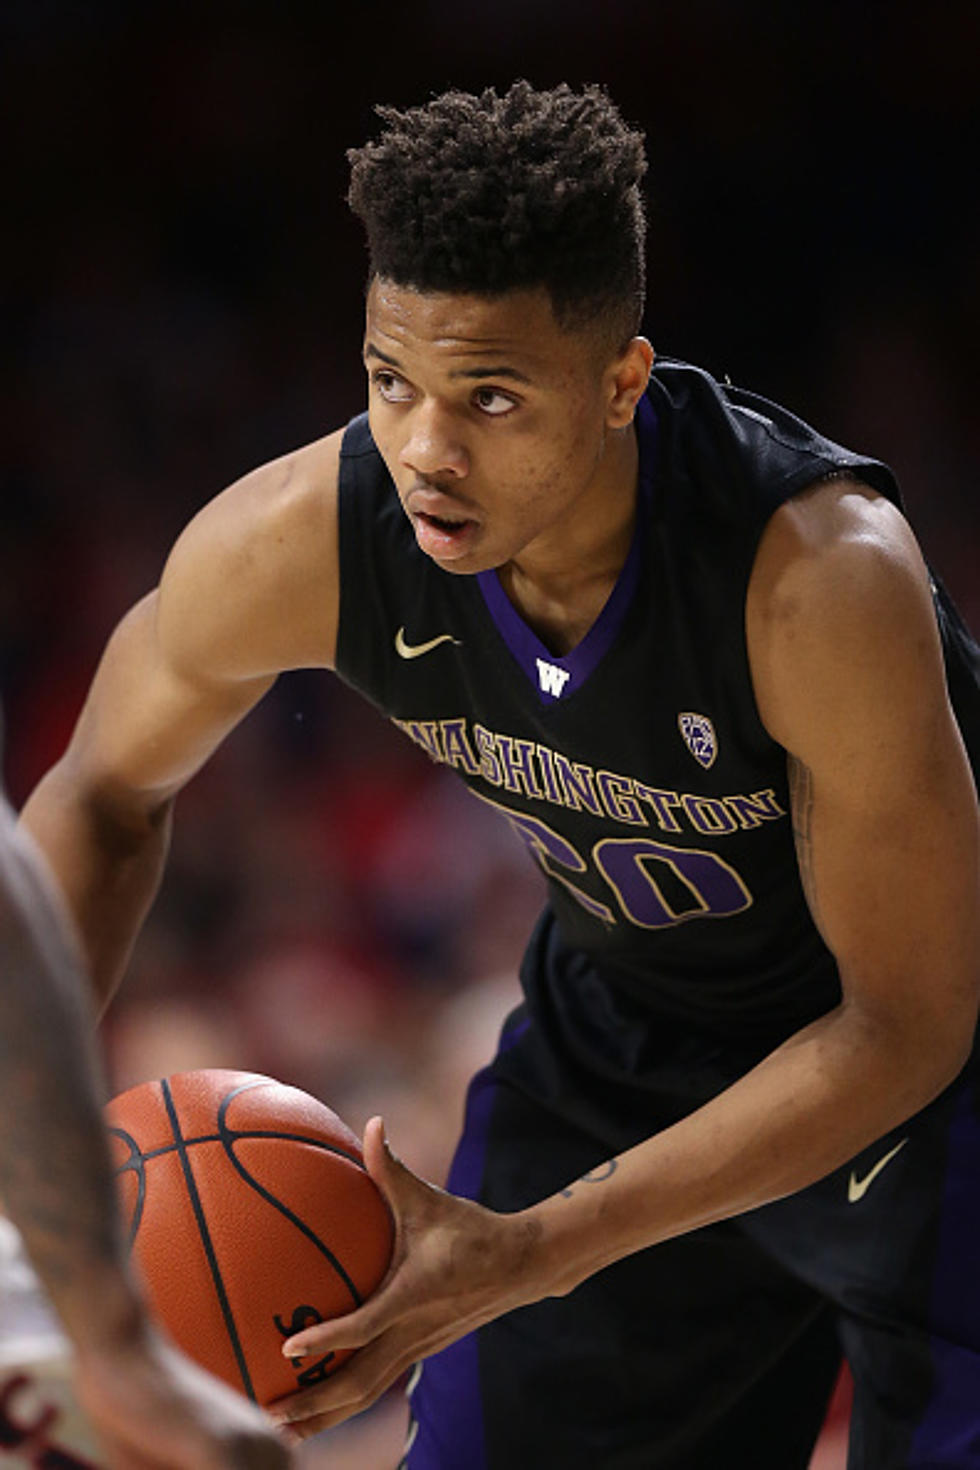 Is Markelle Fultz Really The Top Prospect In The NBA Draft?